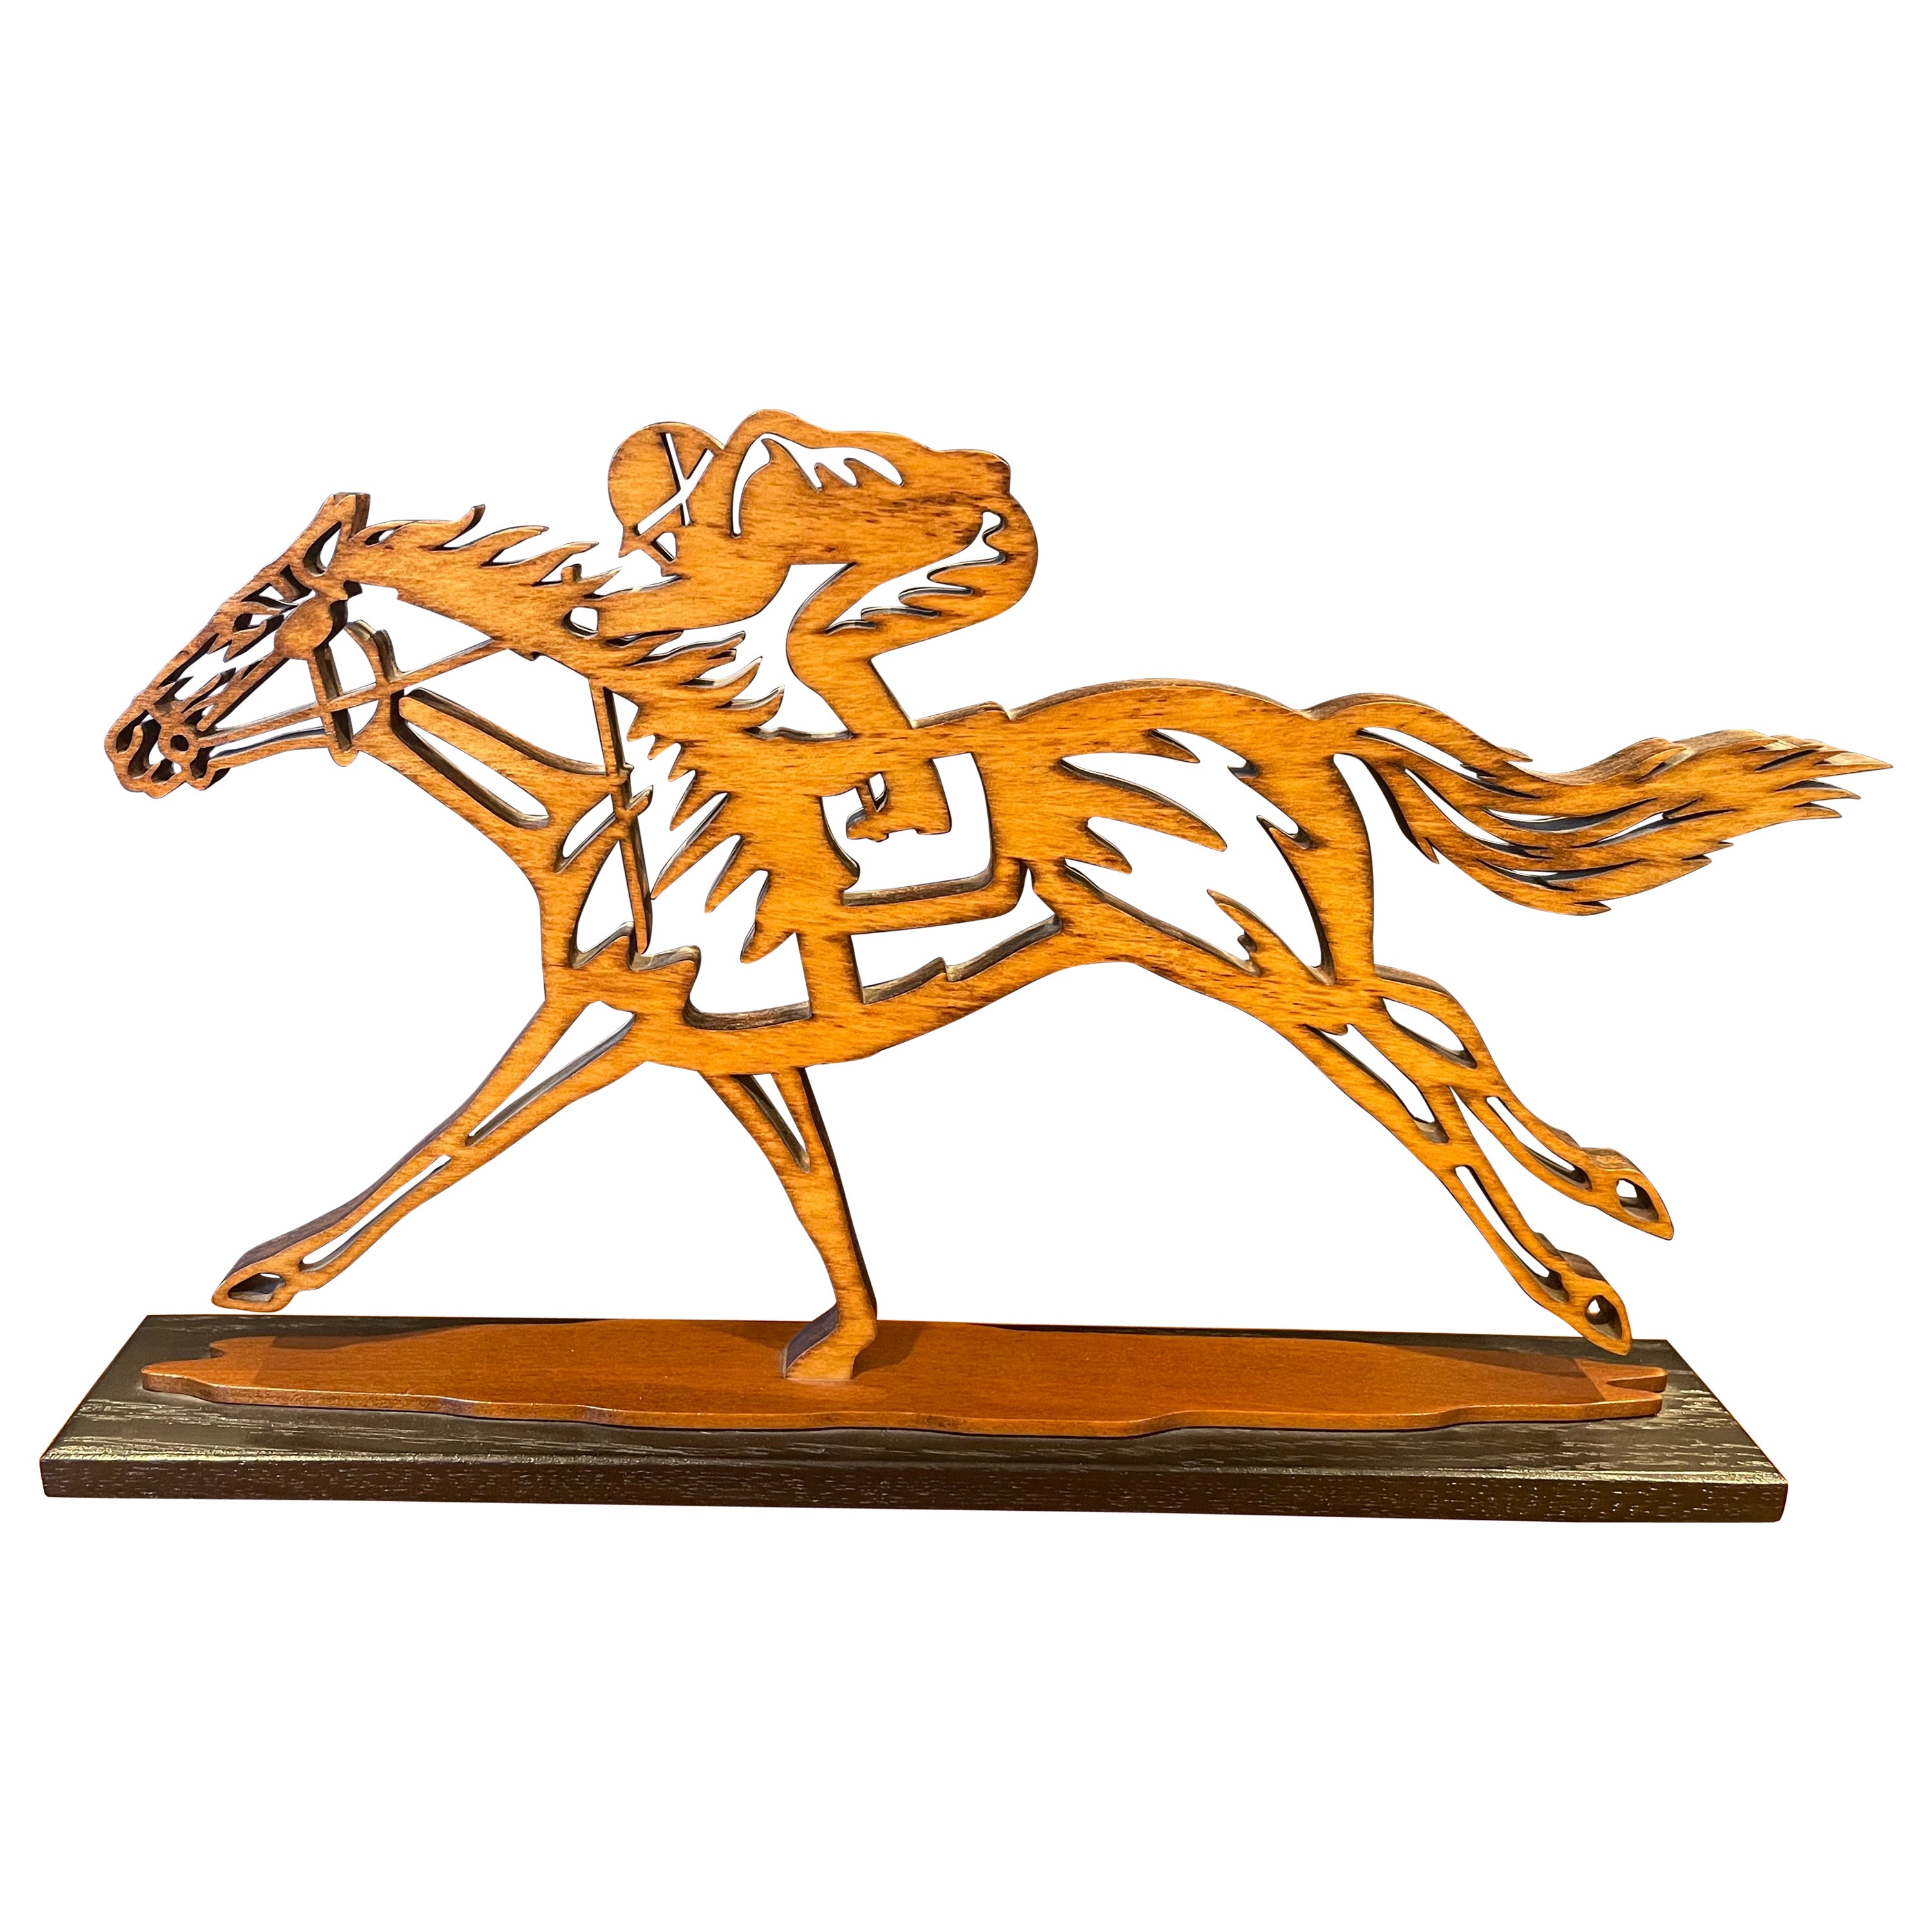 Thoroughbred Horses Racing Wood Sculpture For Sale